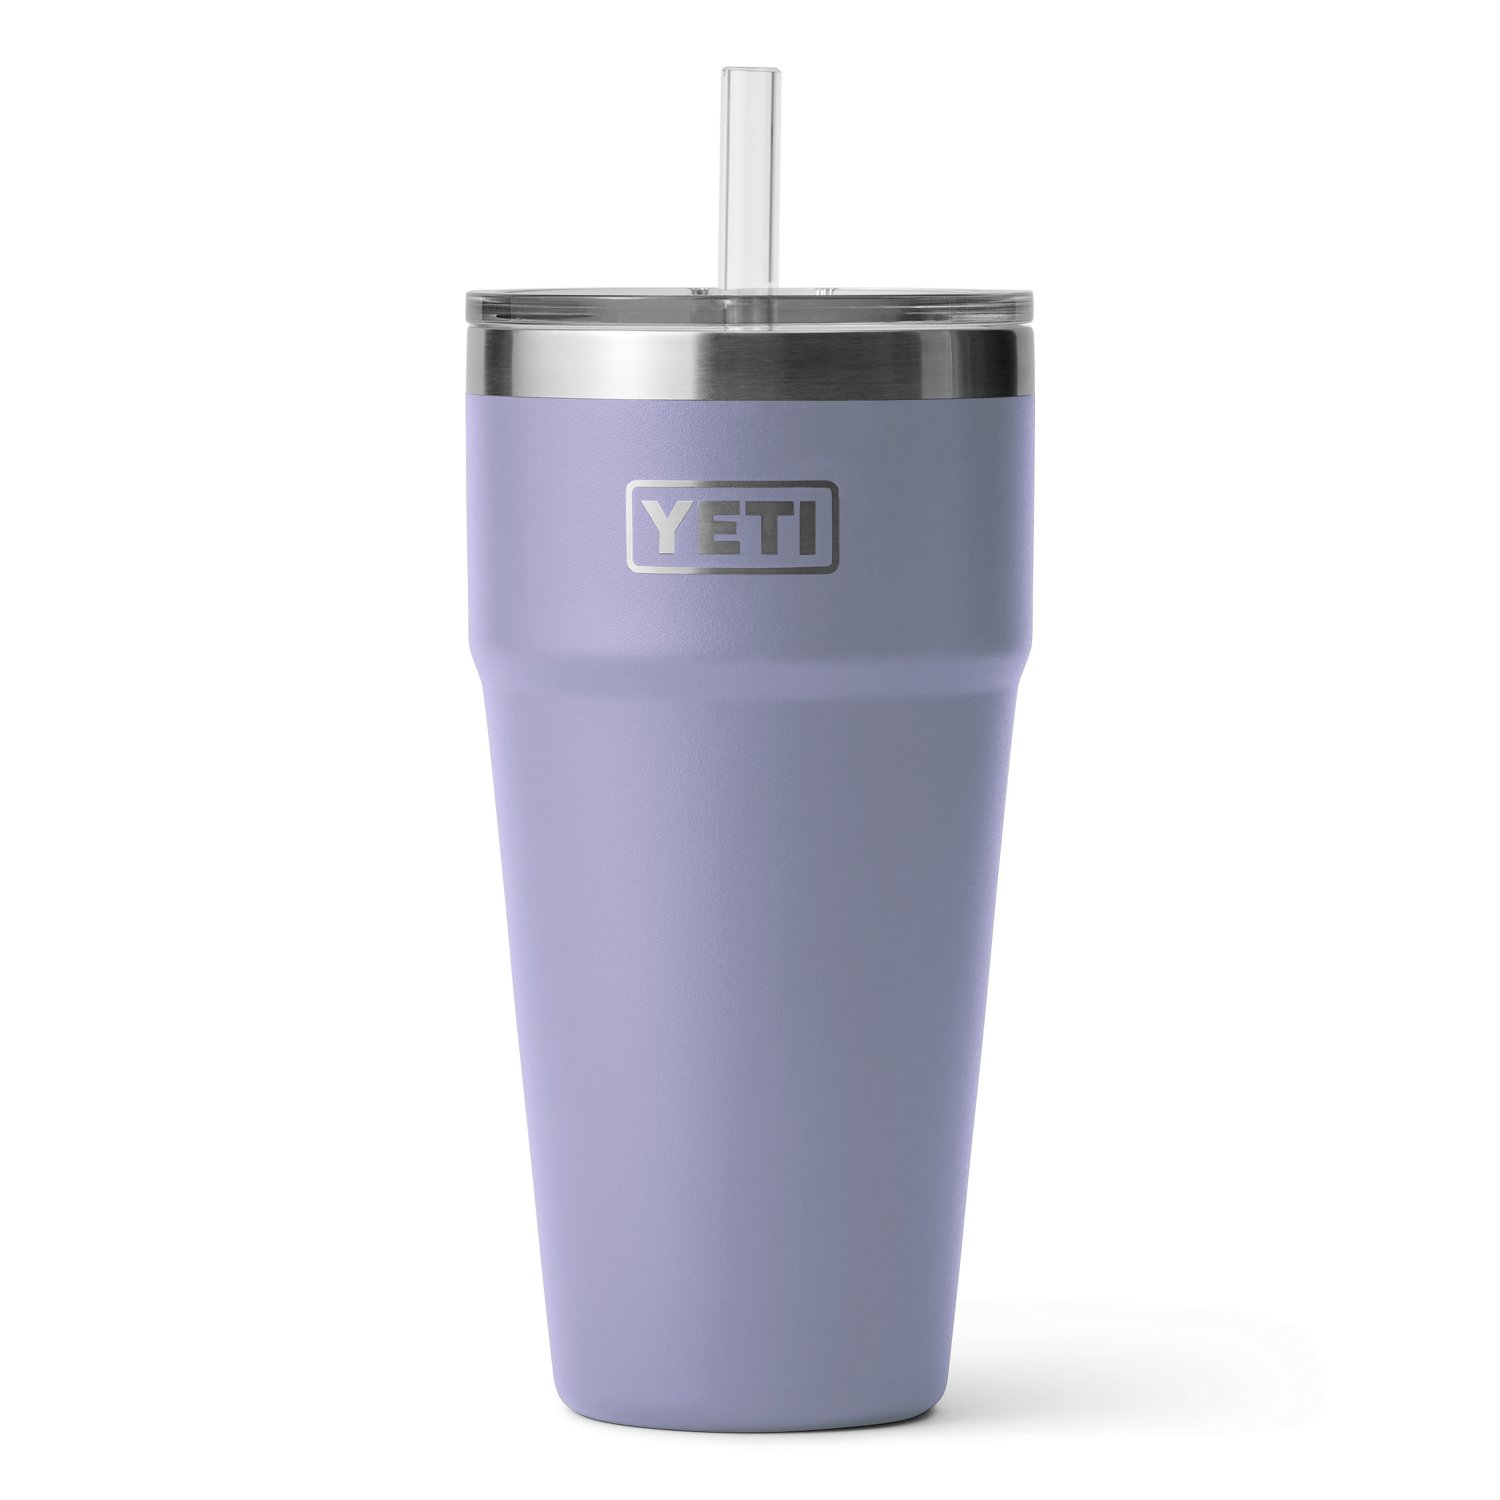 https://academy.scene7.com/is/image/academy//drinkware/yeti-rambler-26-oz-stackable-cup-with-straw-lid-21071501743-purple/cb9b5add3709494b8be58d8061284df9?$d-plp-product-image$